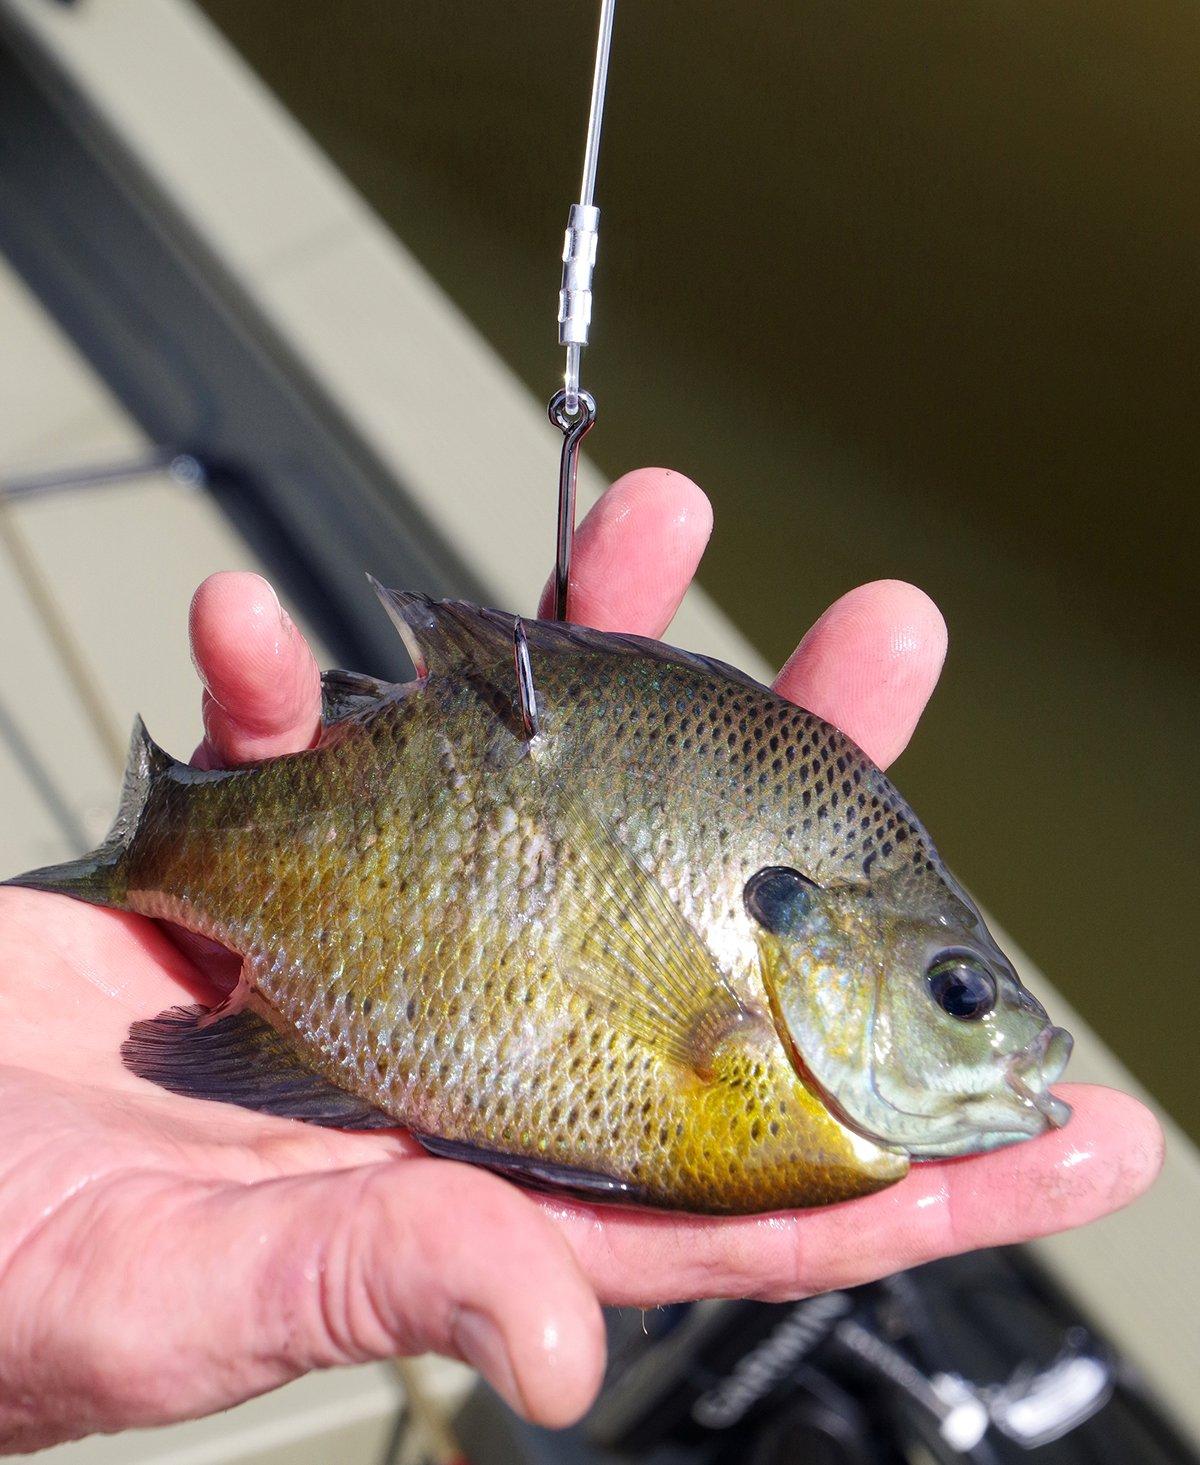 Live-fish baits like this bluegill work best on heavyweight flatheads, which rarely scavenge or eat invertebrates. Image by Keith 